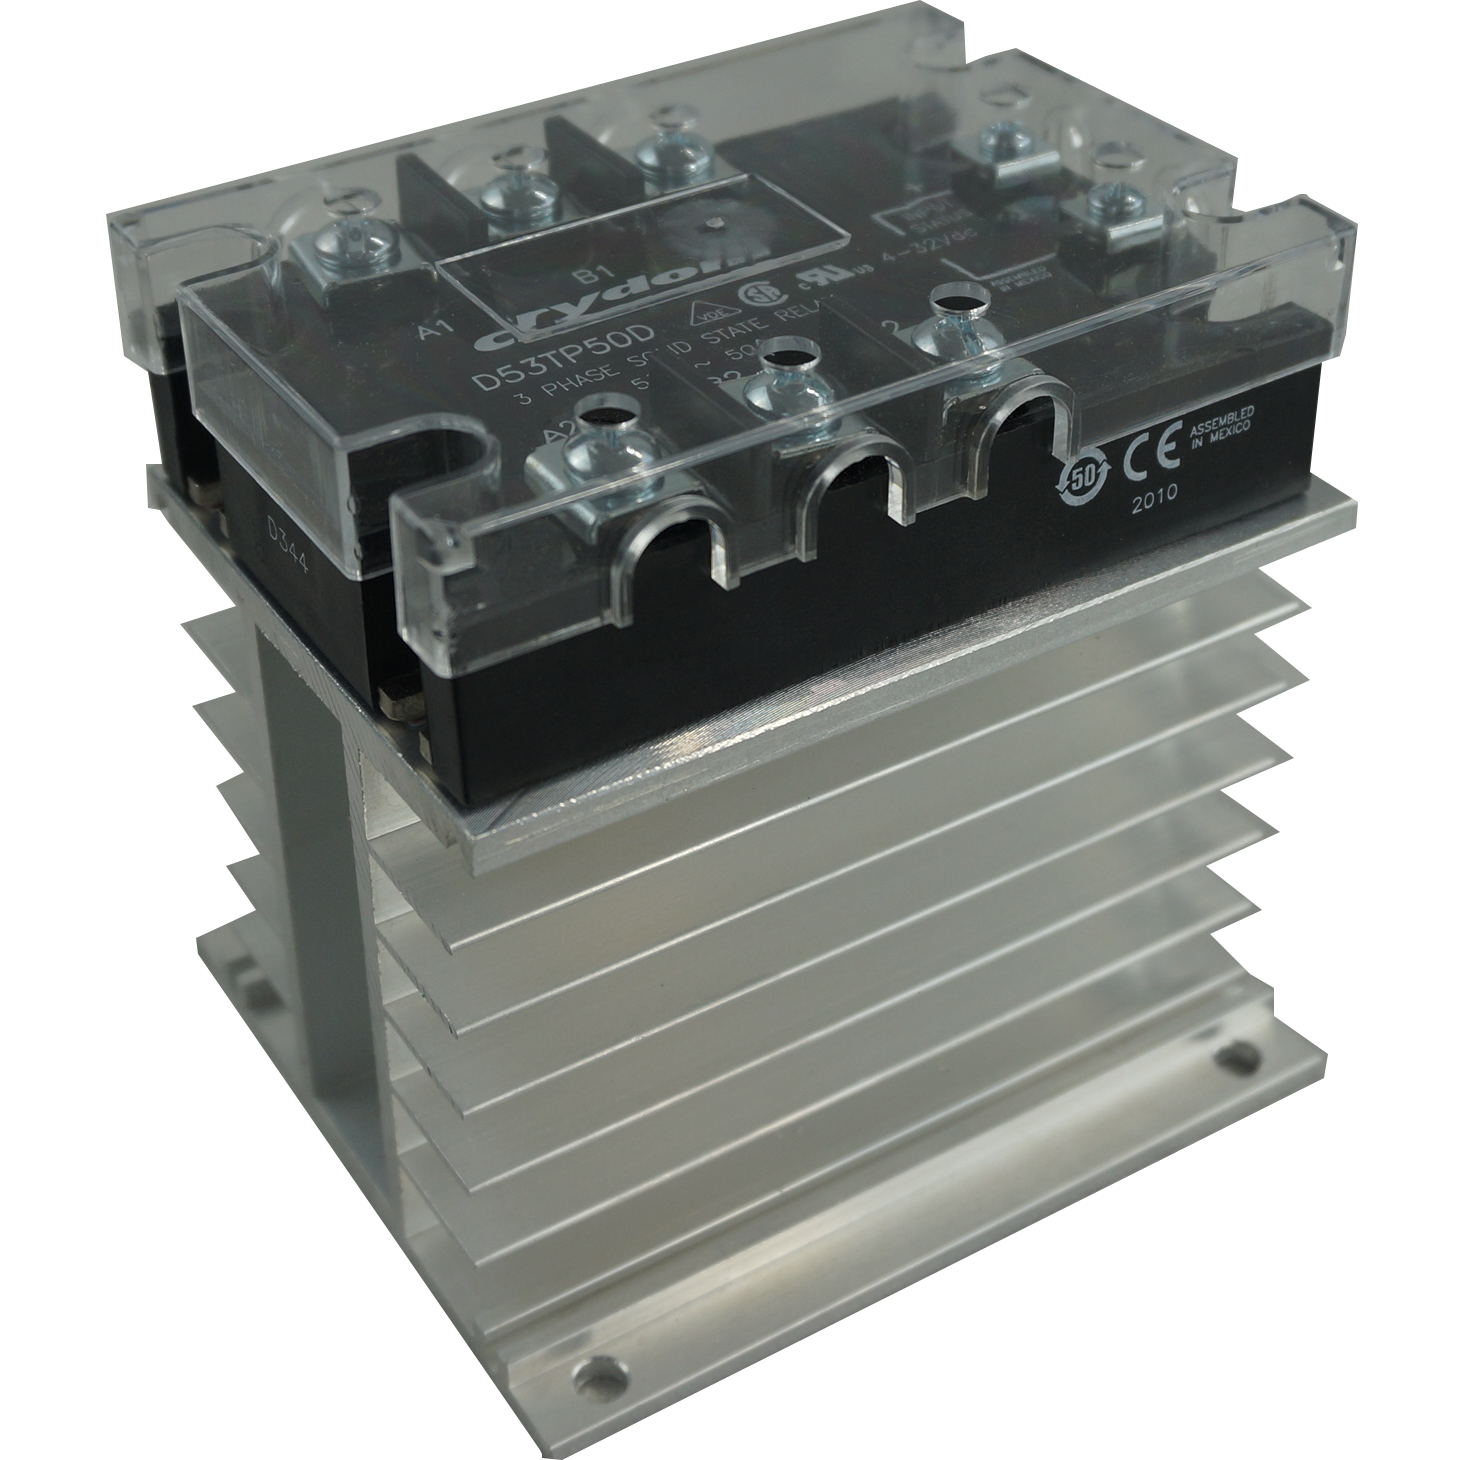 FTH6053ZD3 + HS212DR, Solid State Relay, and Heatsink Assembly, 3 Phase 3-32VDC Control, 20 Amp per phase @ 40 Deg C, 48-530VAC Load, LED Status Indicator, with IP20 Cover